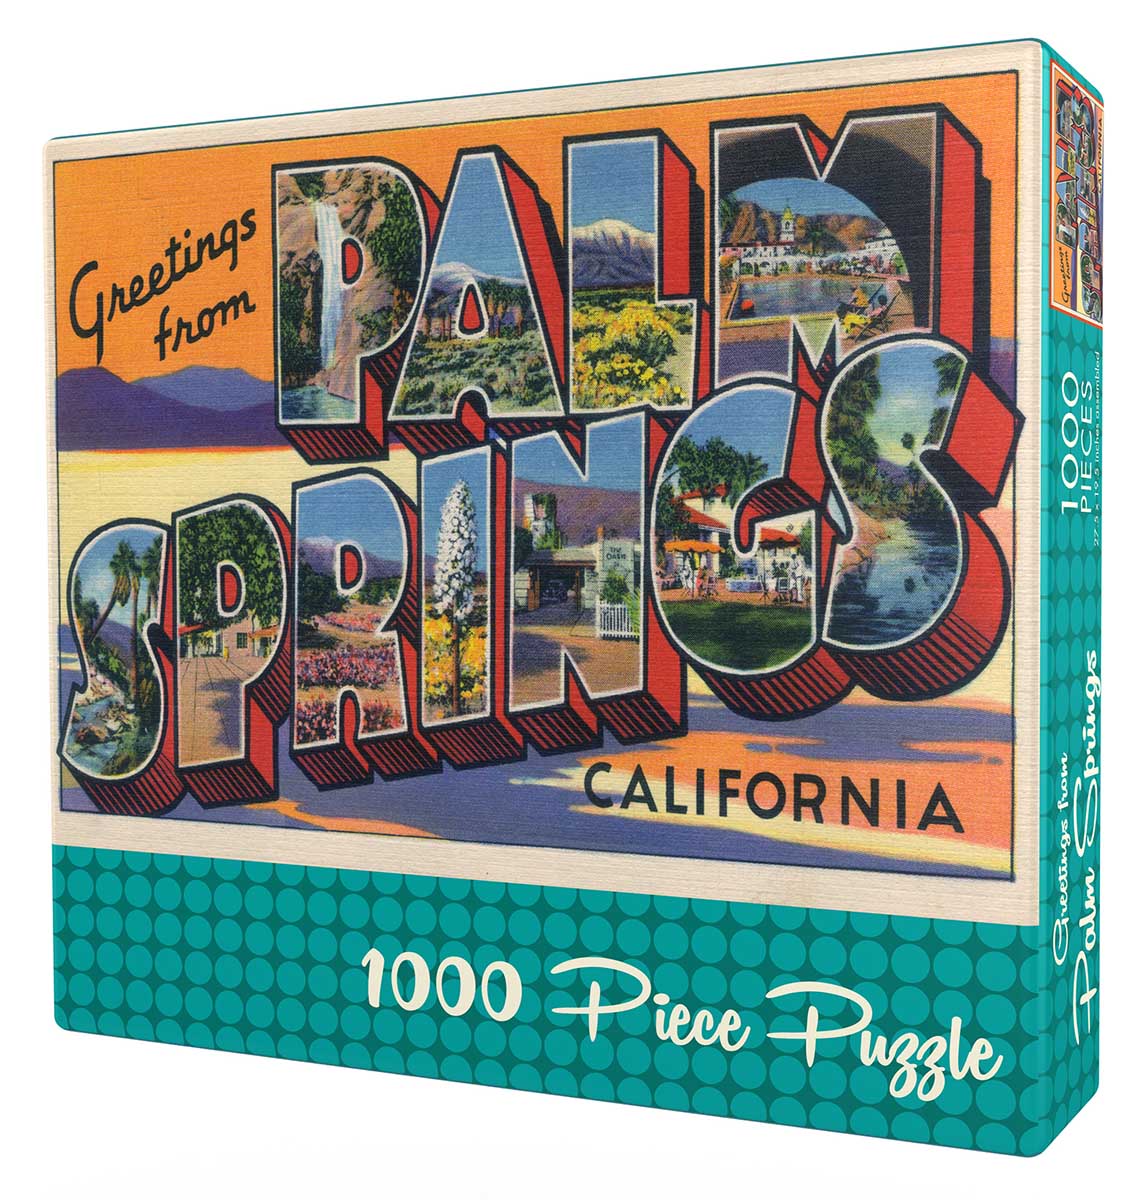 Greetings from Palm Springs - Scratch and Dent Travel Jigsaw Puzzle